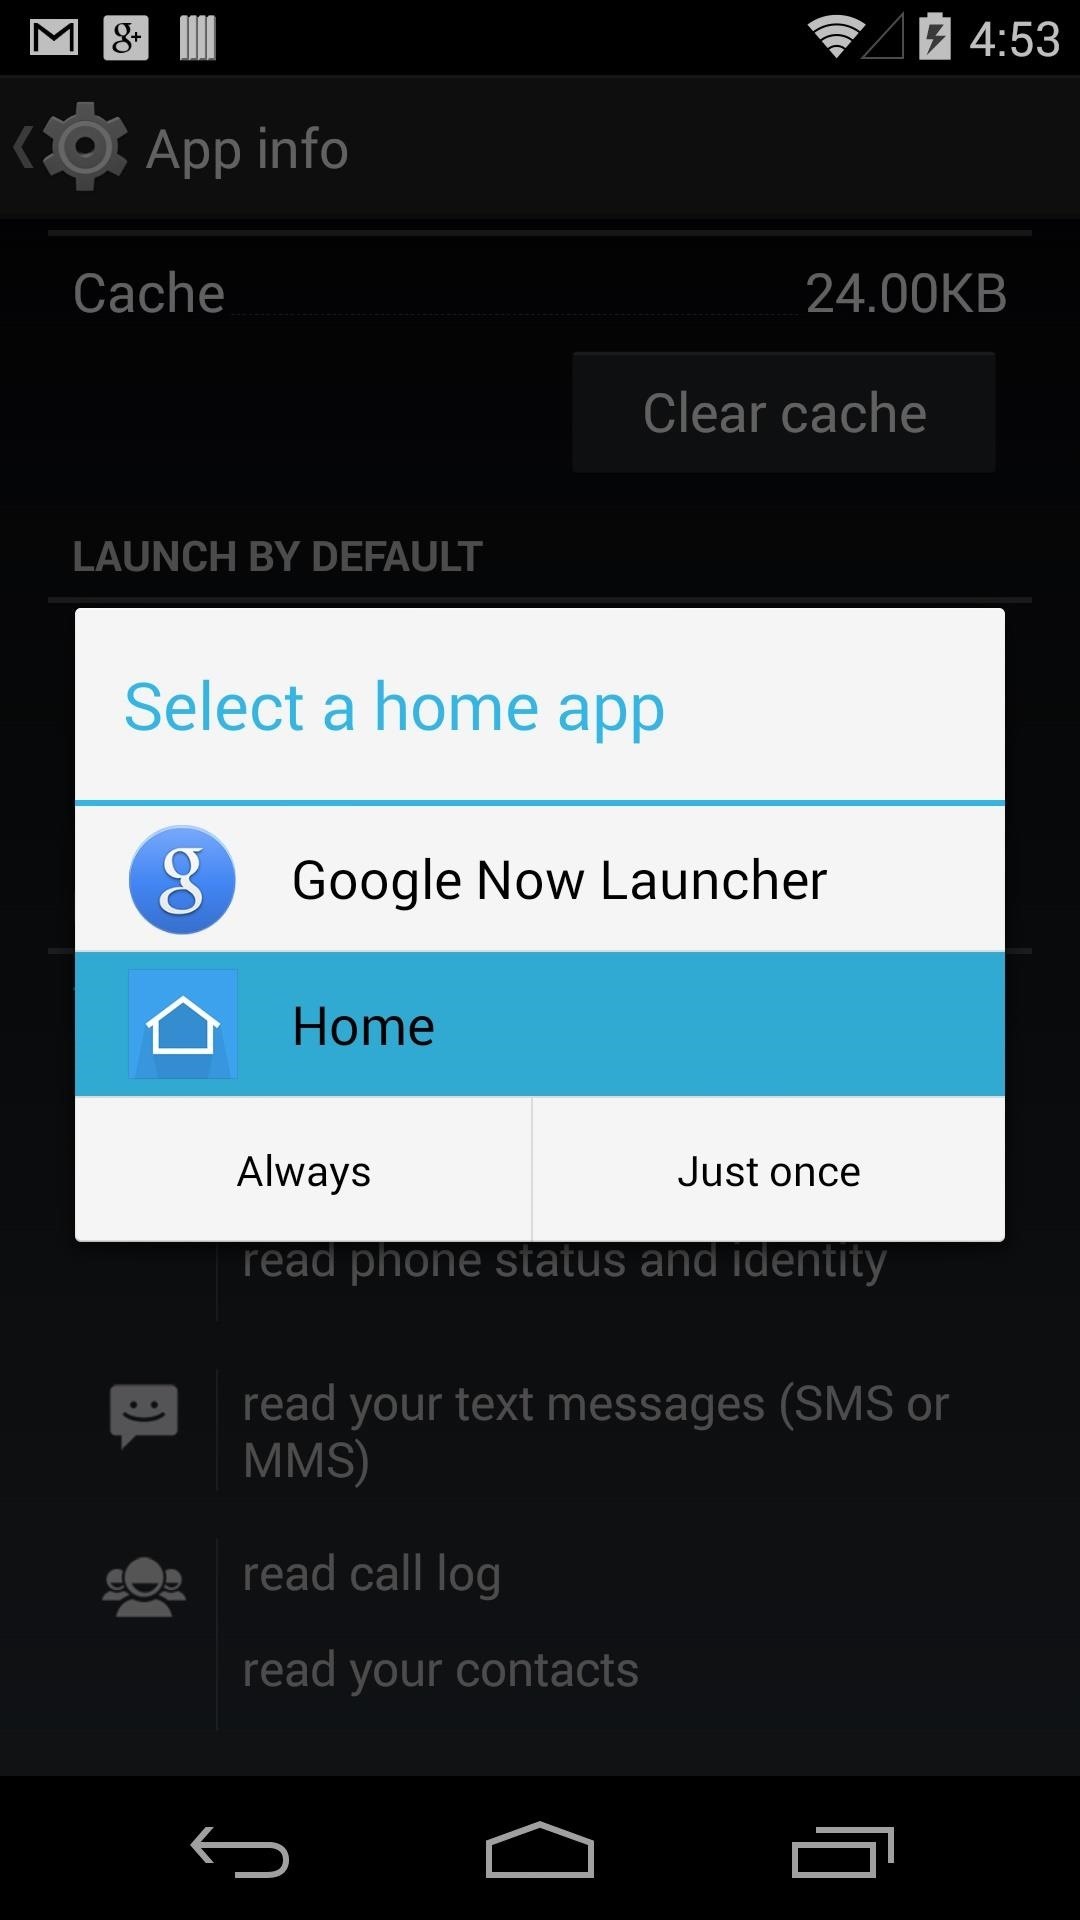 How to Get the LG G3's Exclusive "Home" Launcher on Your HTC One or Other Android Device